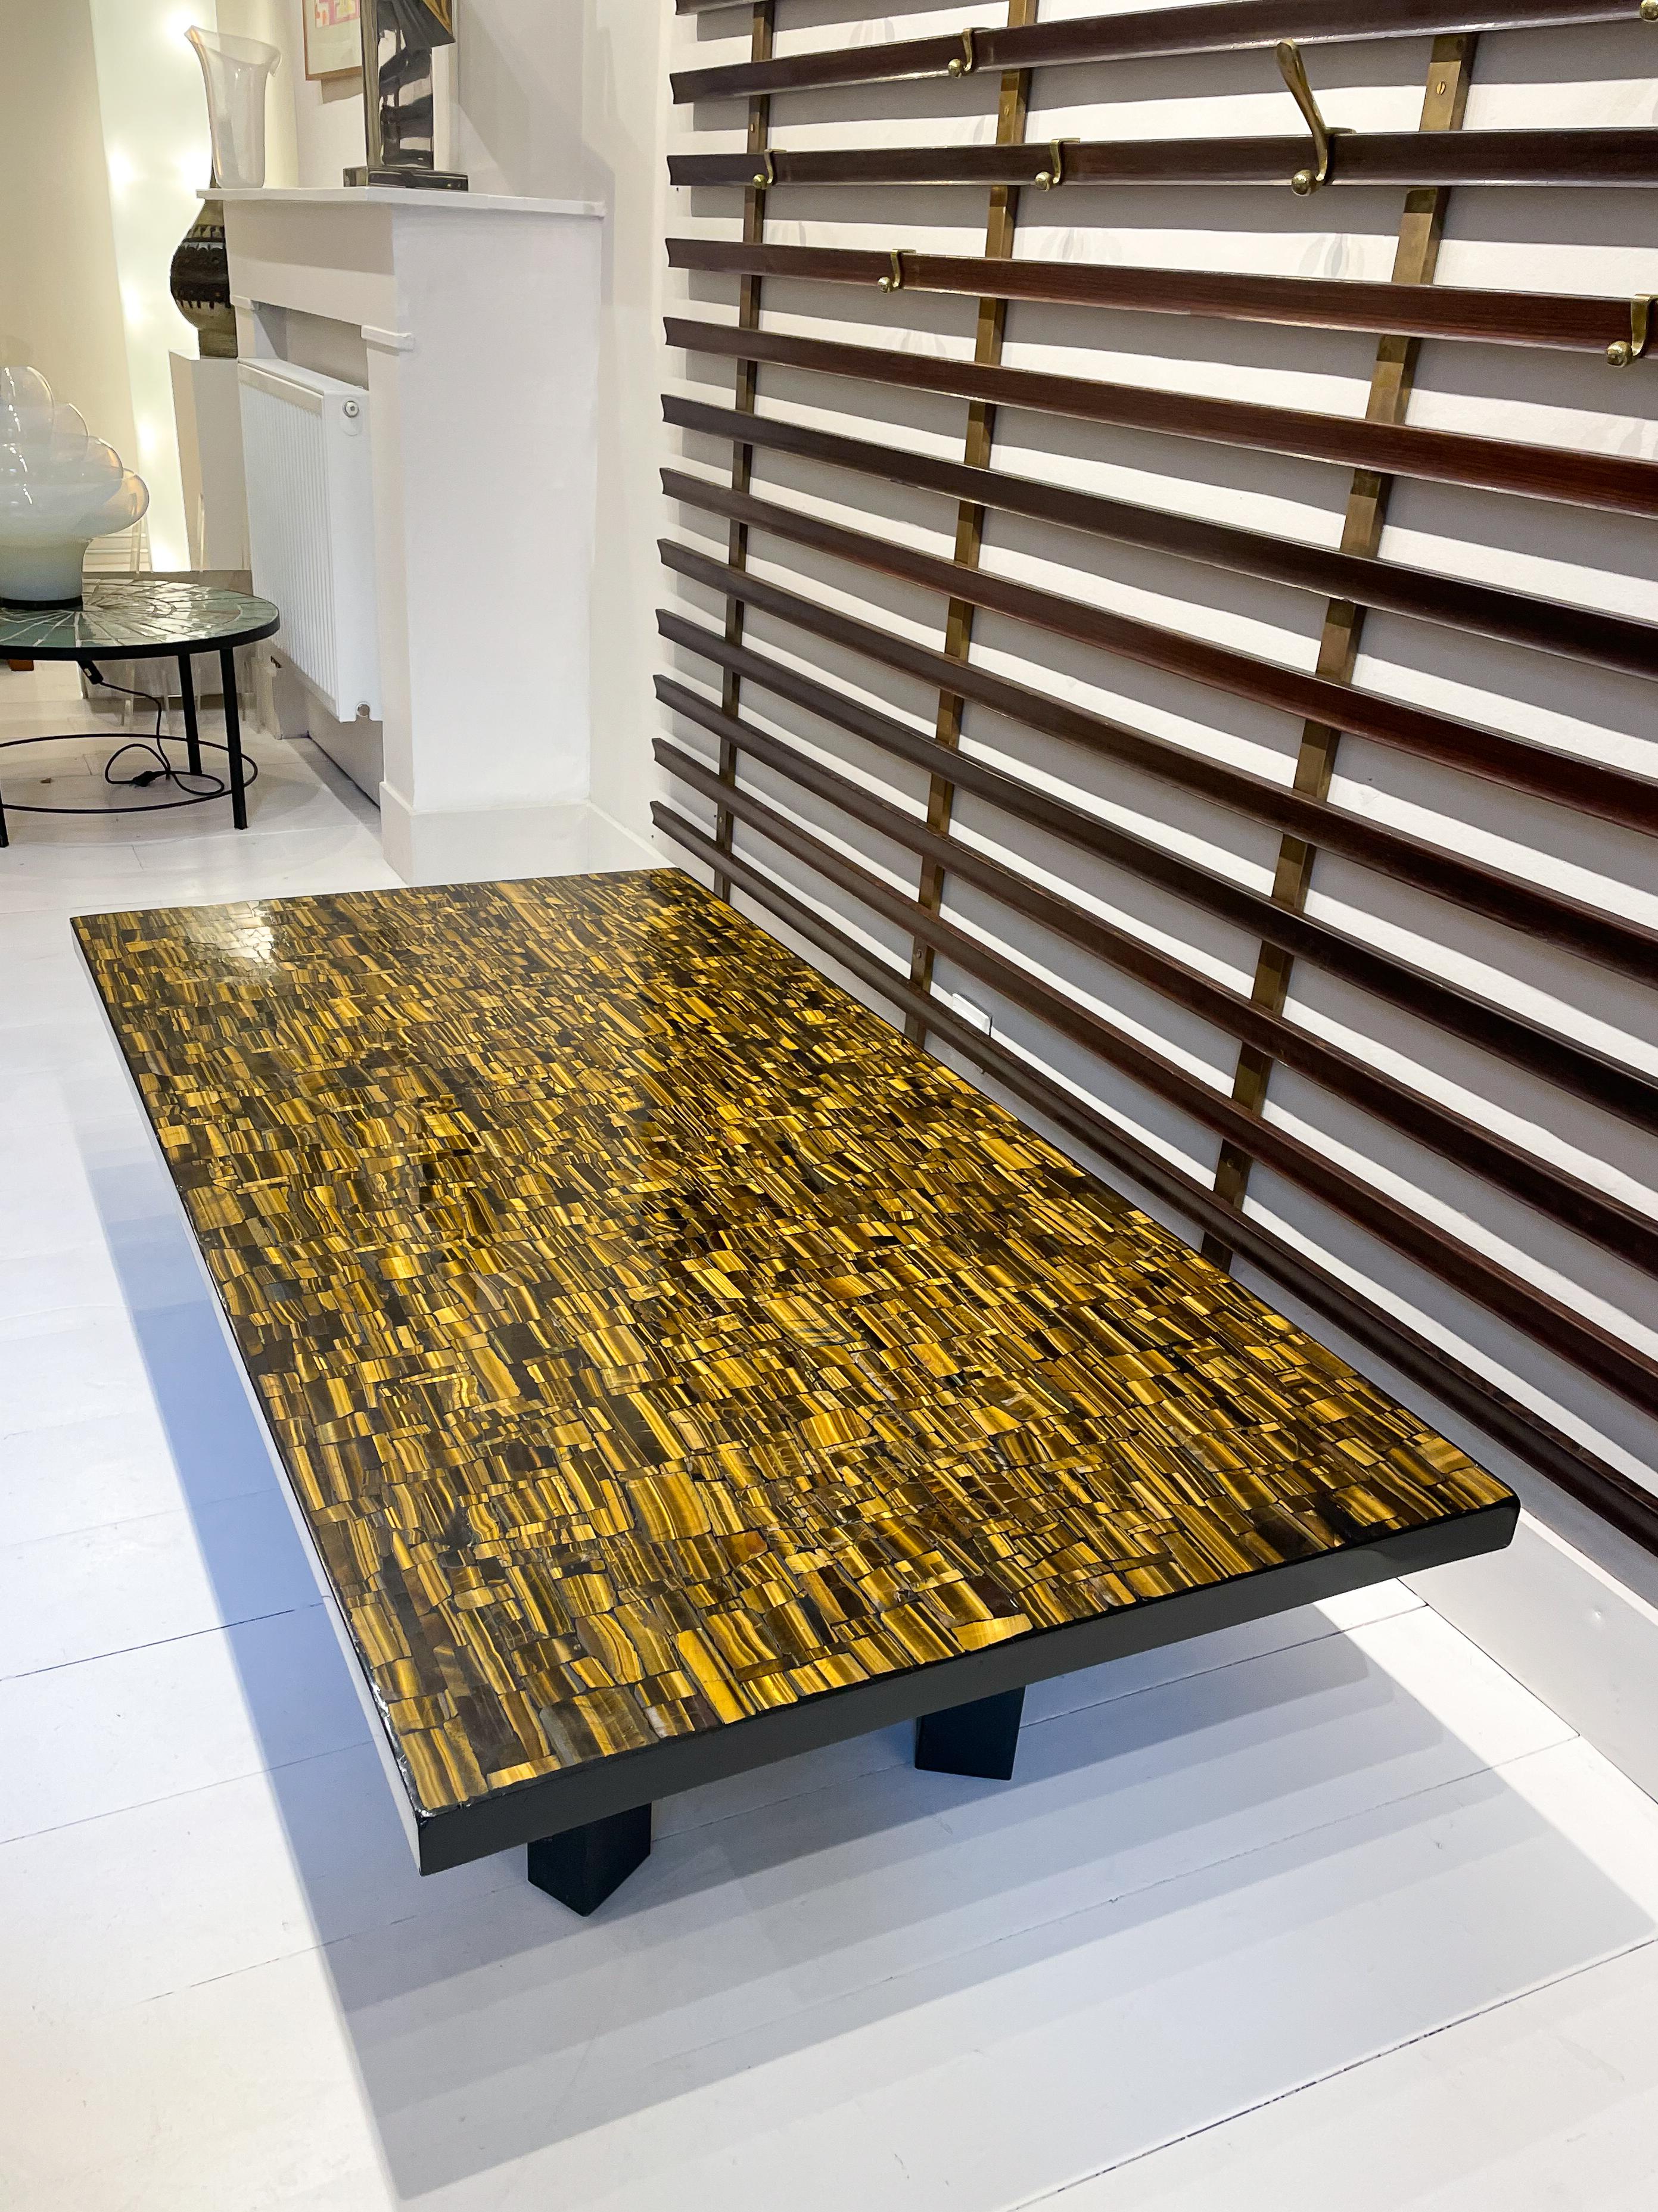 Large Ado Chale Coffee Table, Oeil de Tigre, Belgium

Metalworker by training, Belgian designer Ado Chale discovered mineralogy during a journey in Germany in the 1950’s. He cultivated his passion alongside his wife, Huguette Schaal, who became a